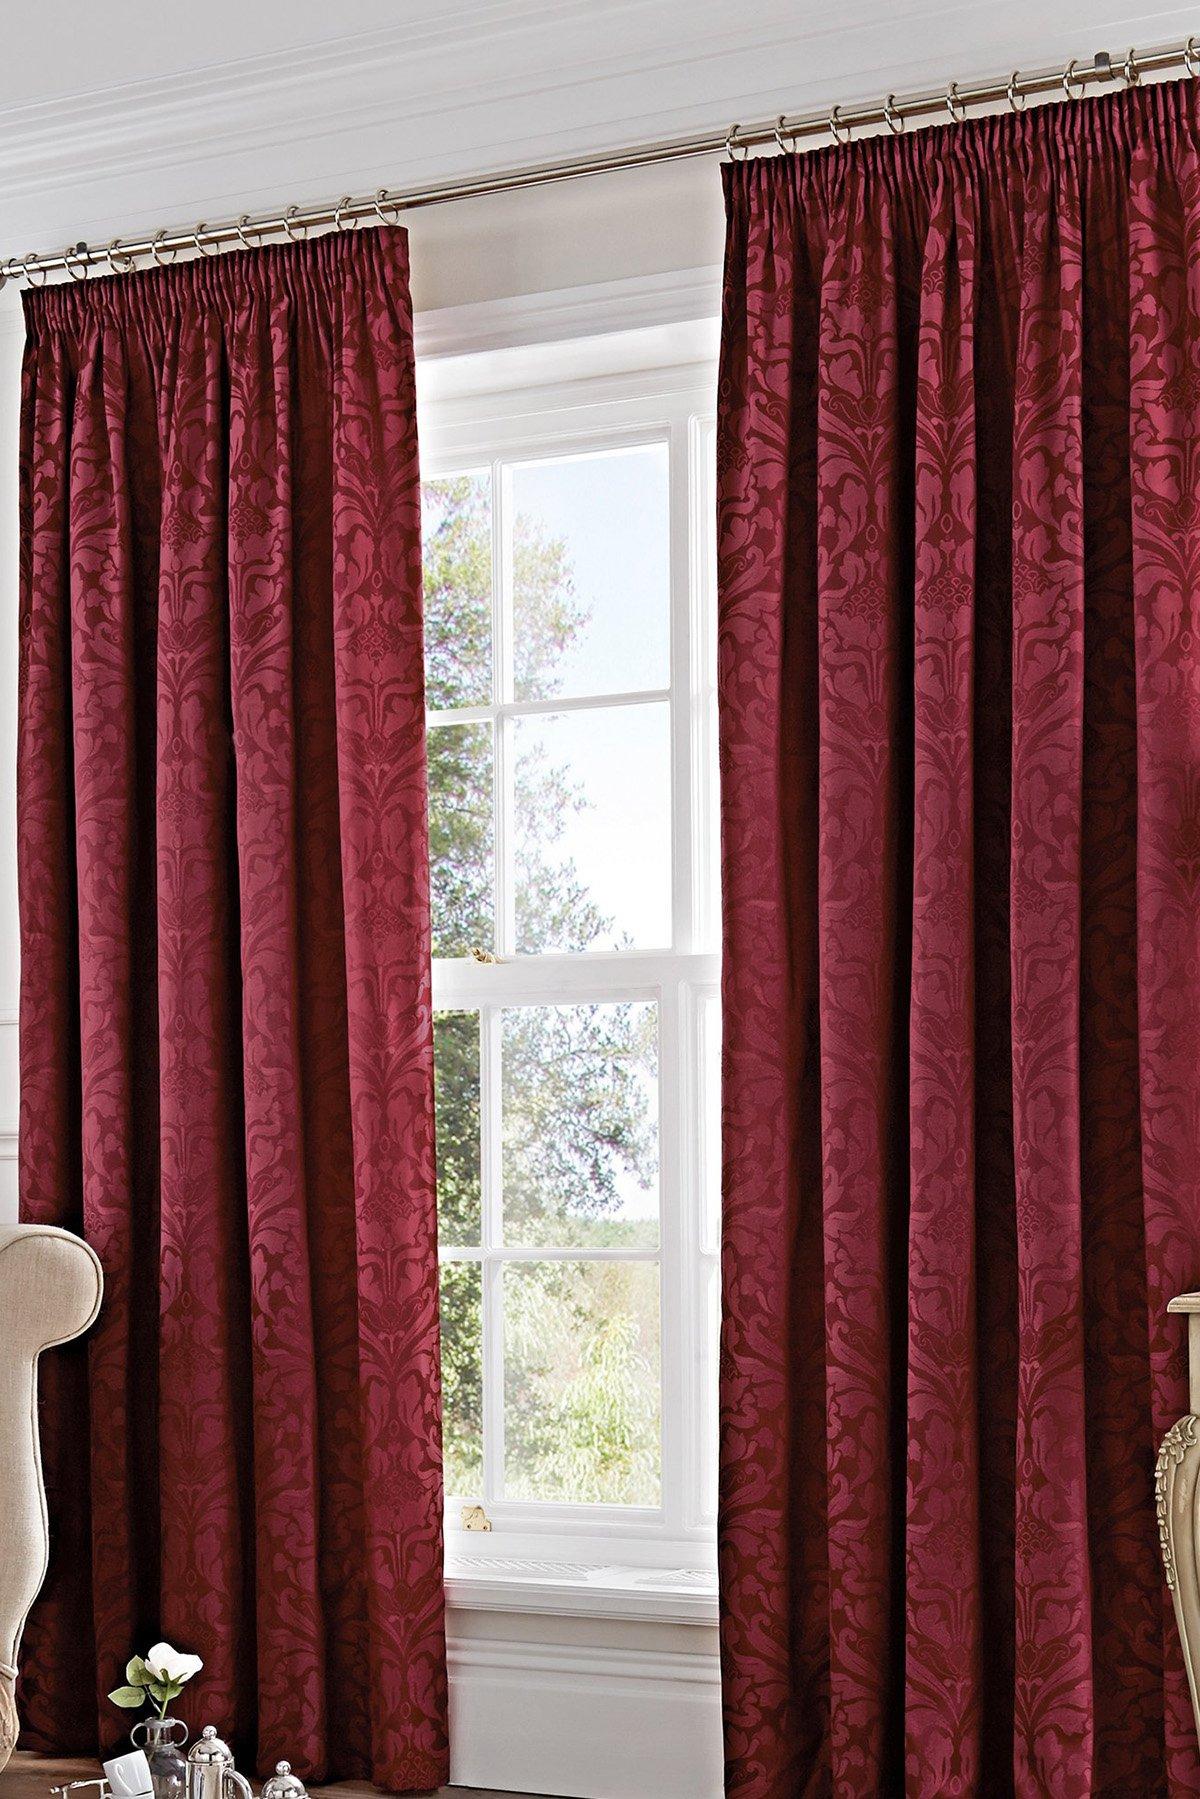 Dreams & Drapes Woven Eastbourne Pencil Pleat Lined Curtains|117x137cm(46x54inches)